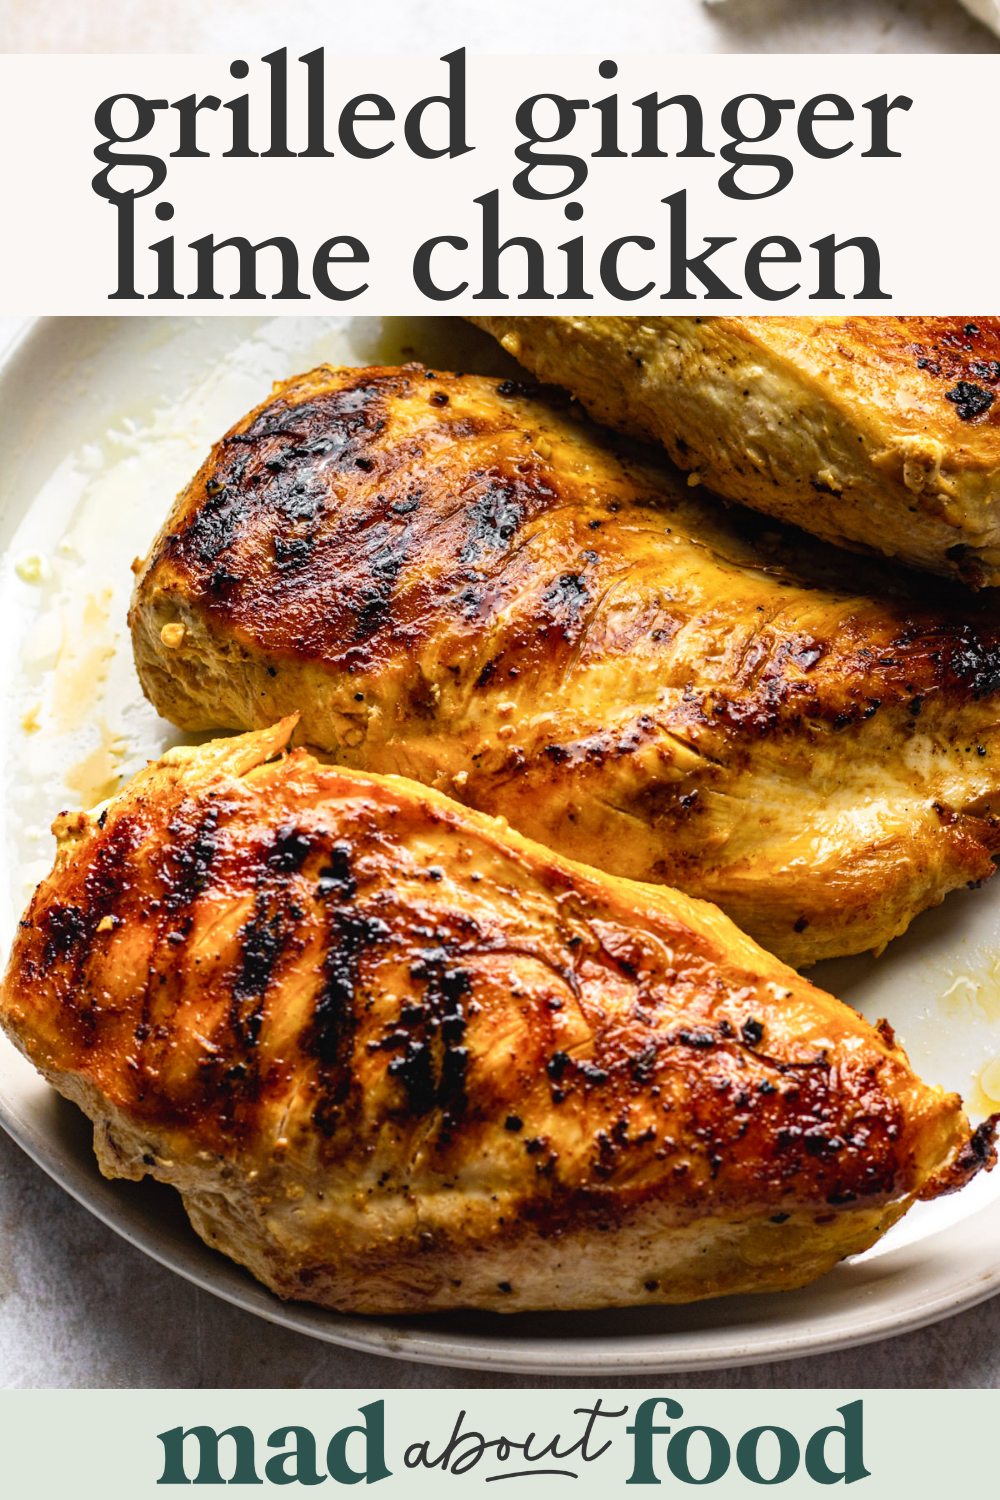 Image for pinning Grilled Ginger Lime Chicken recipe on pinterest